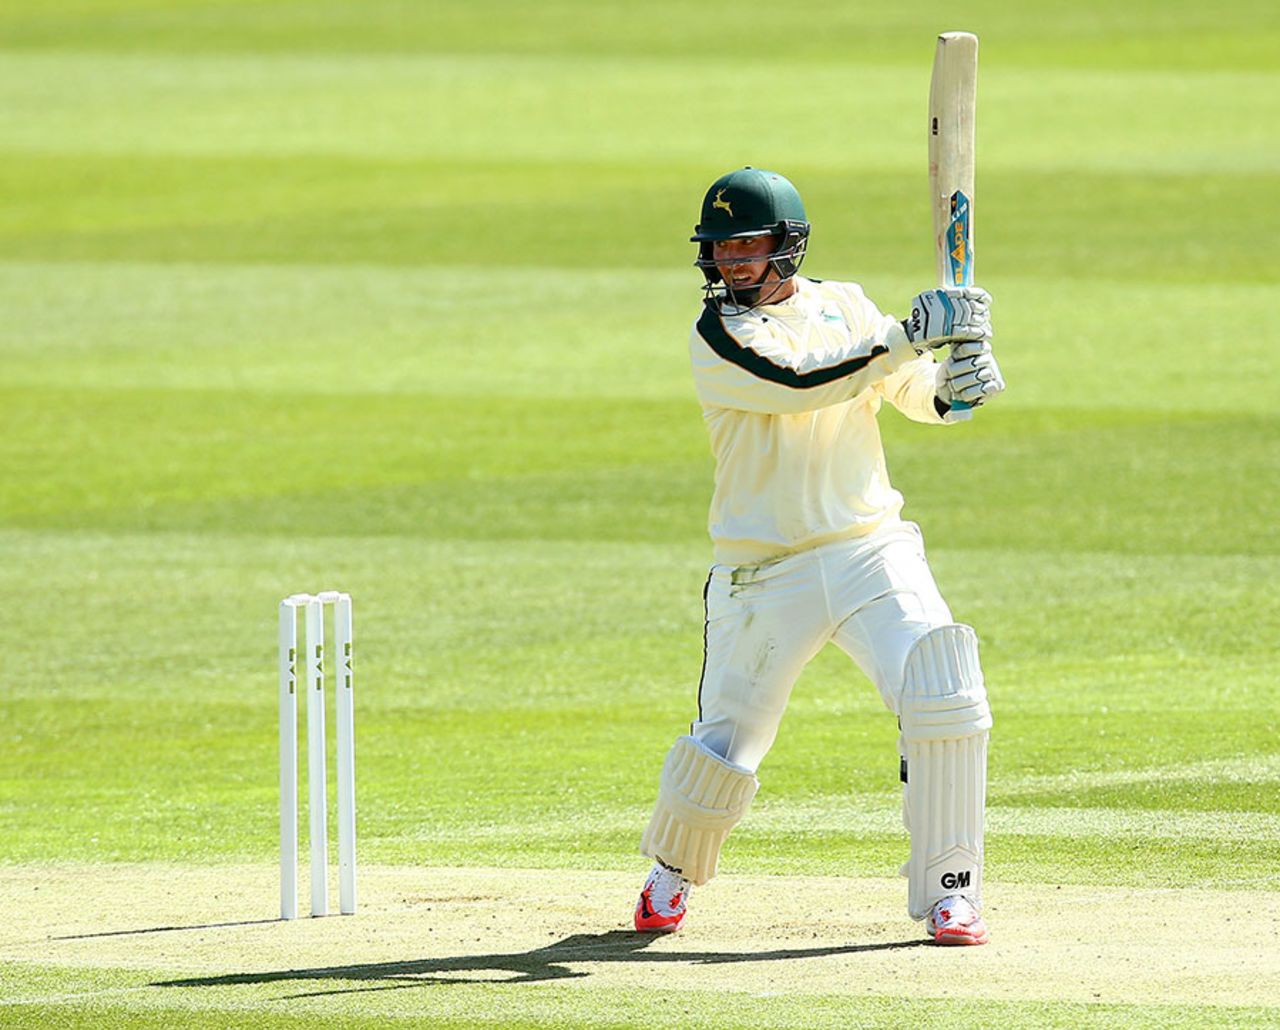 Brendan Taylor made a century on his Championship debut, Middlesex v Nottinghamshire, County Championship Division One, Lord's, April 12, 2015